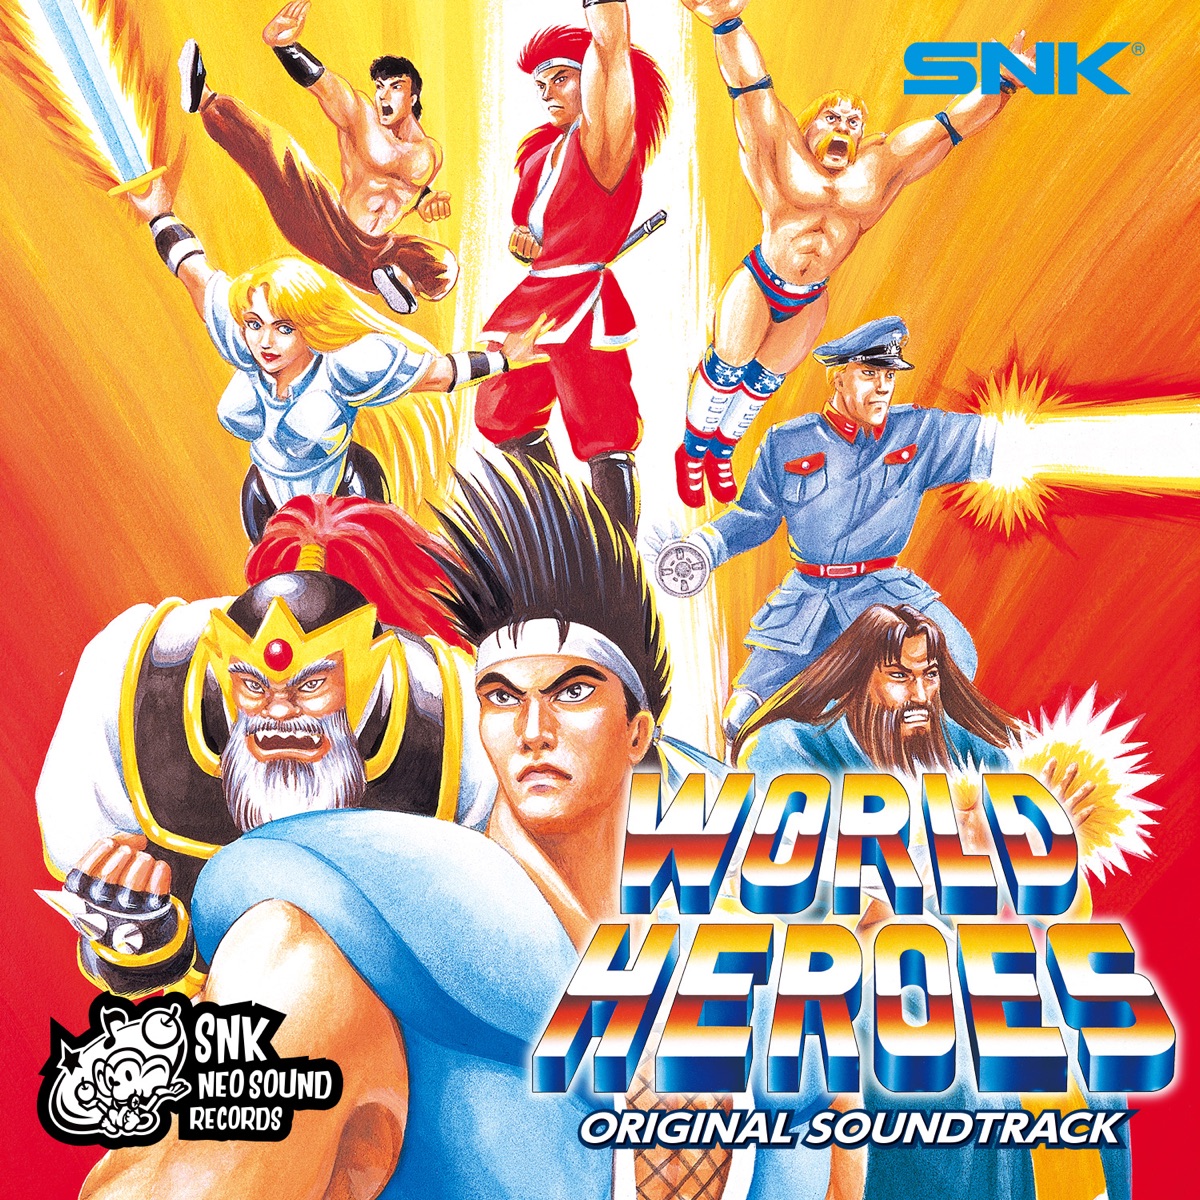 The King of Fighters '98 (Original Soundtrack) - Album by SNK SOUND TEAM -  Apple Music